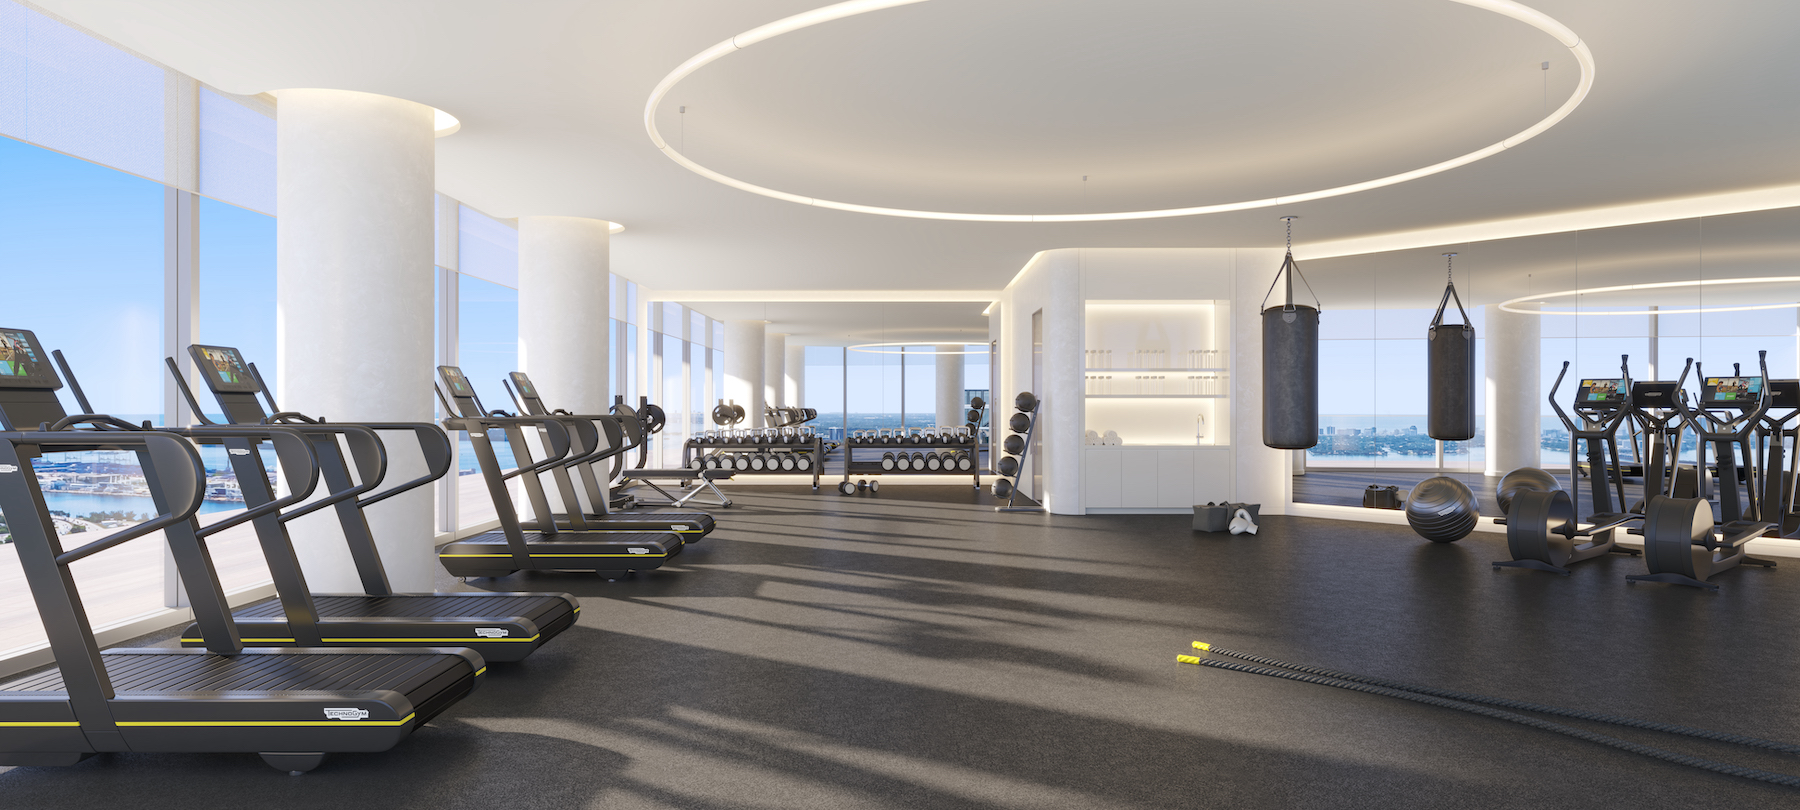 Fitness Center in EDITION Residences